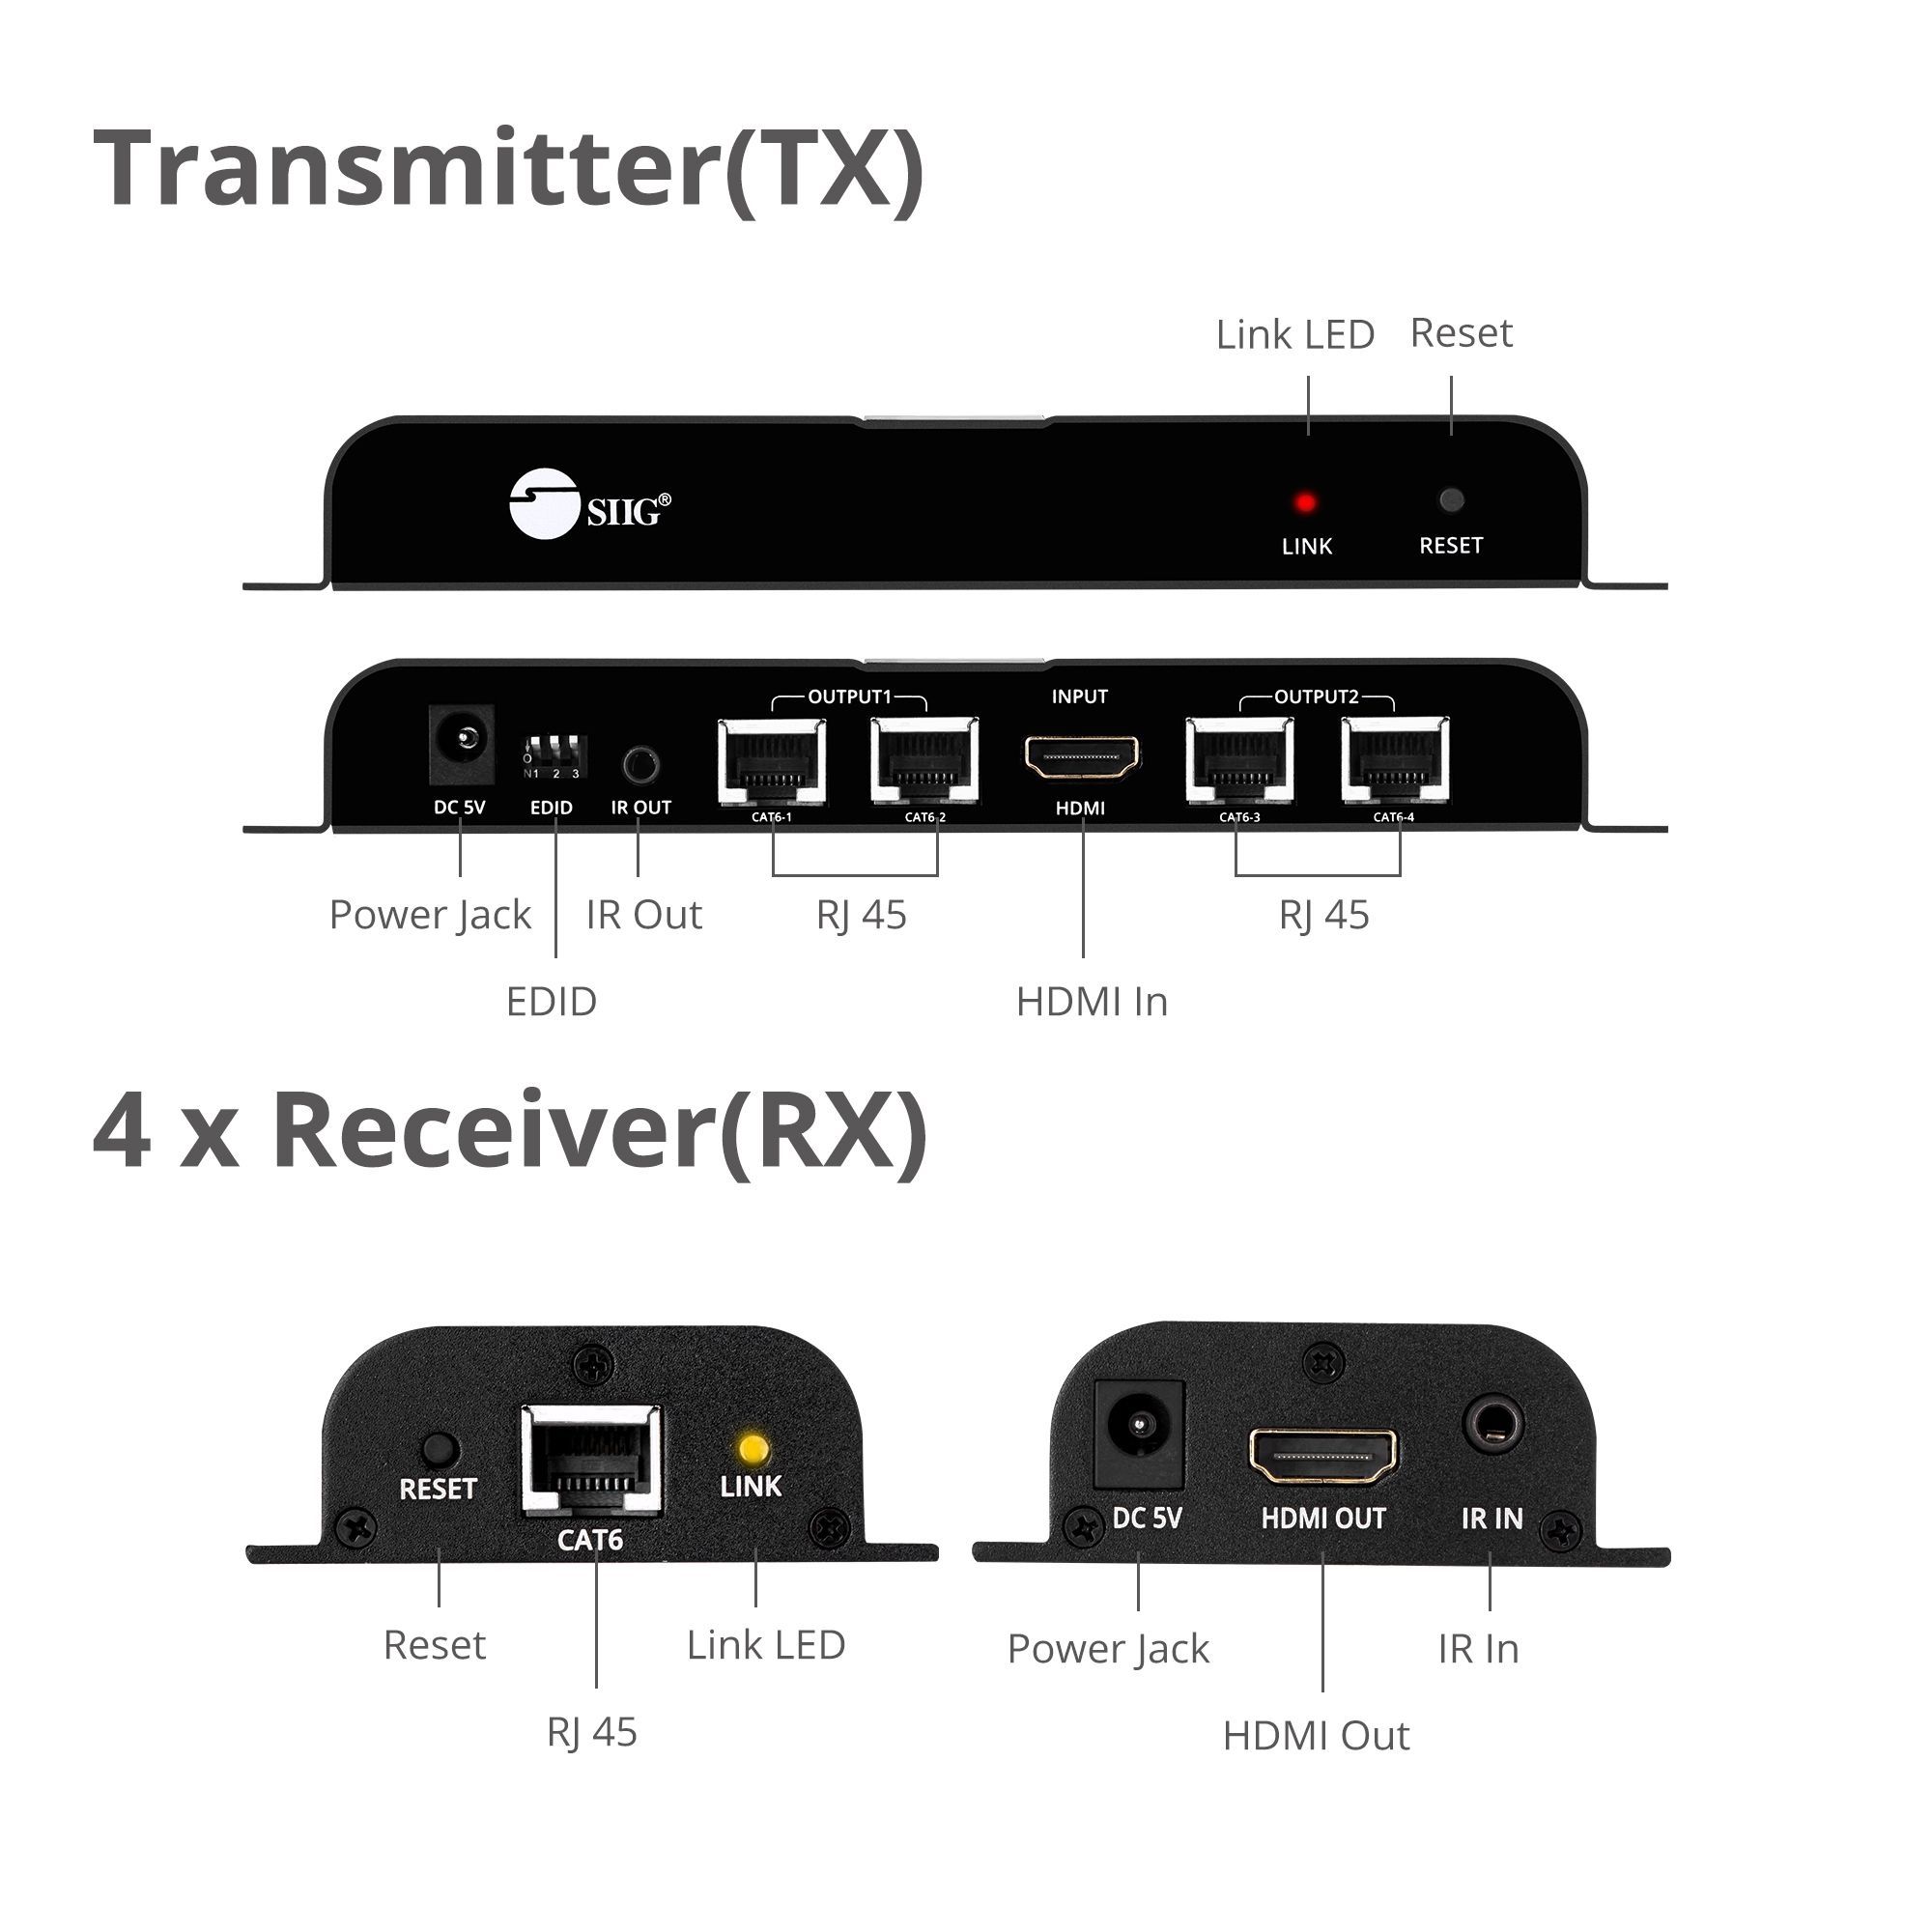 Transmitter and Receiver layout